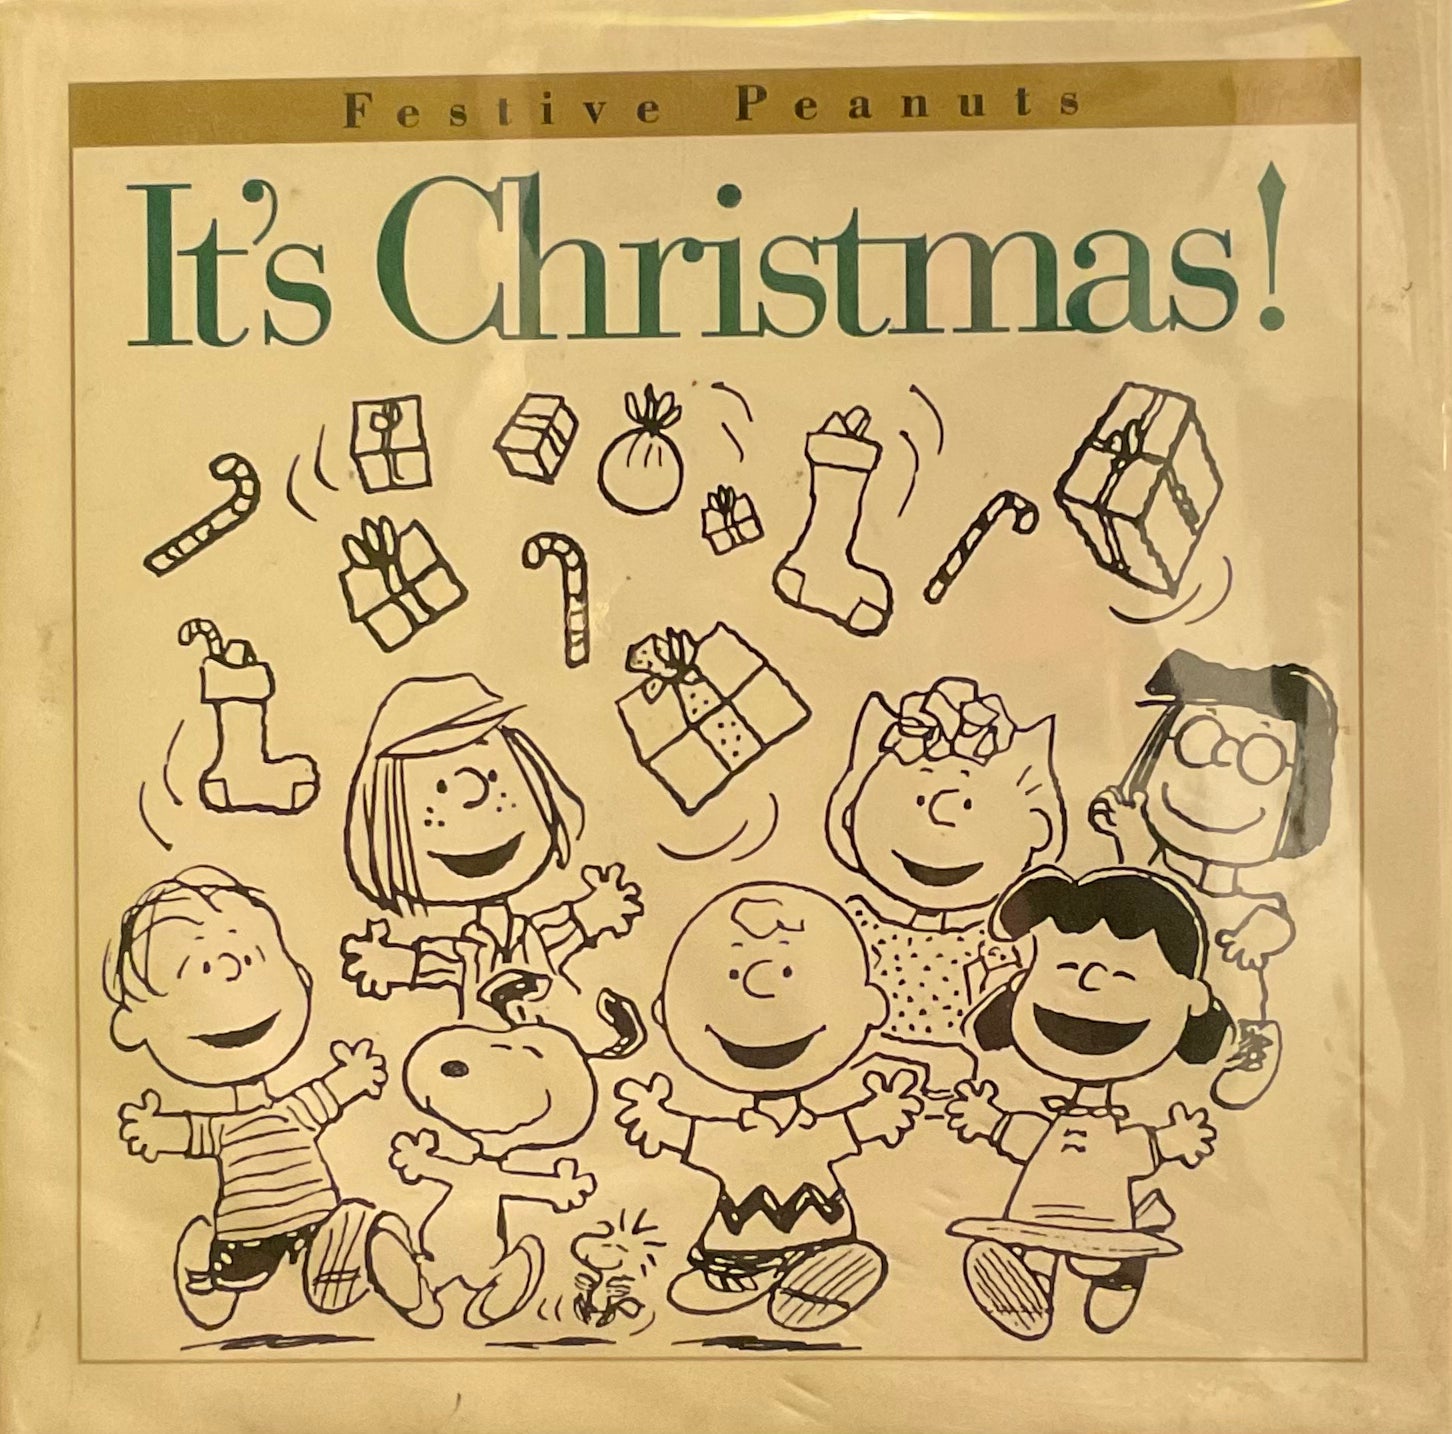 It’s Christmas, Charles M. Schulz